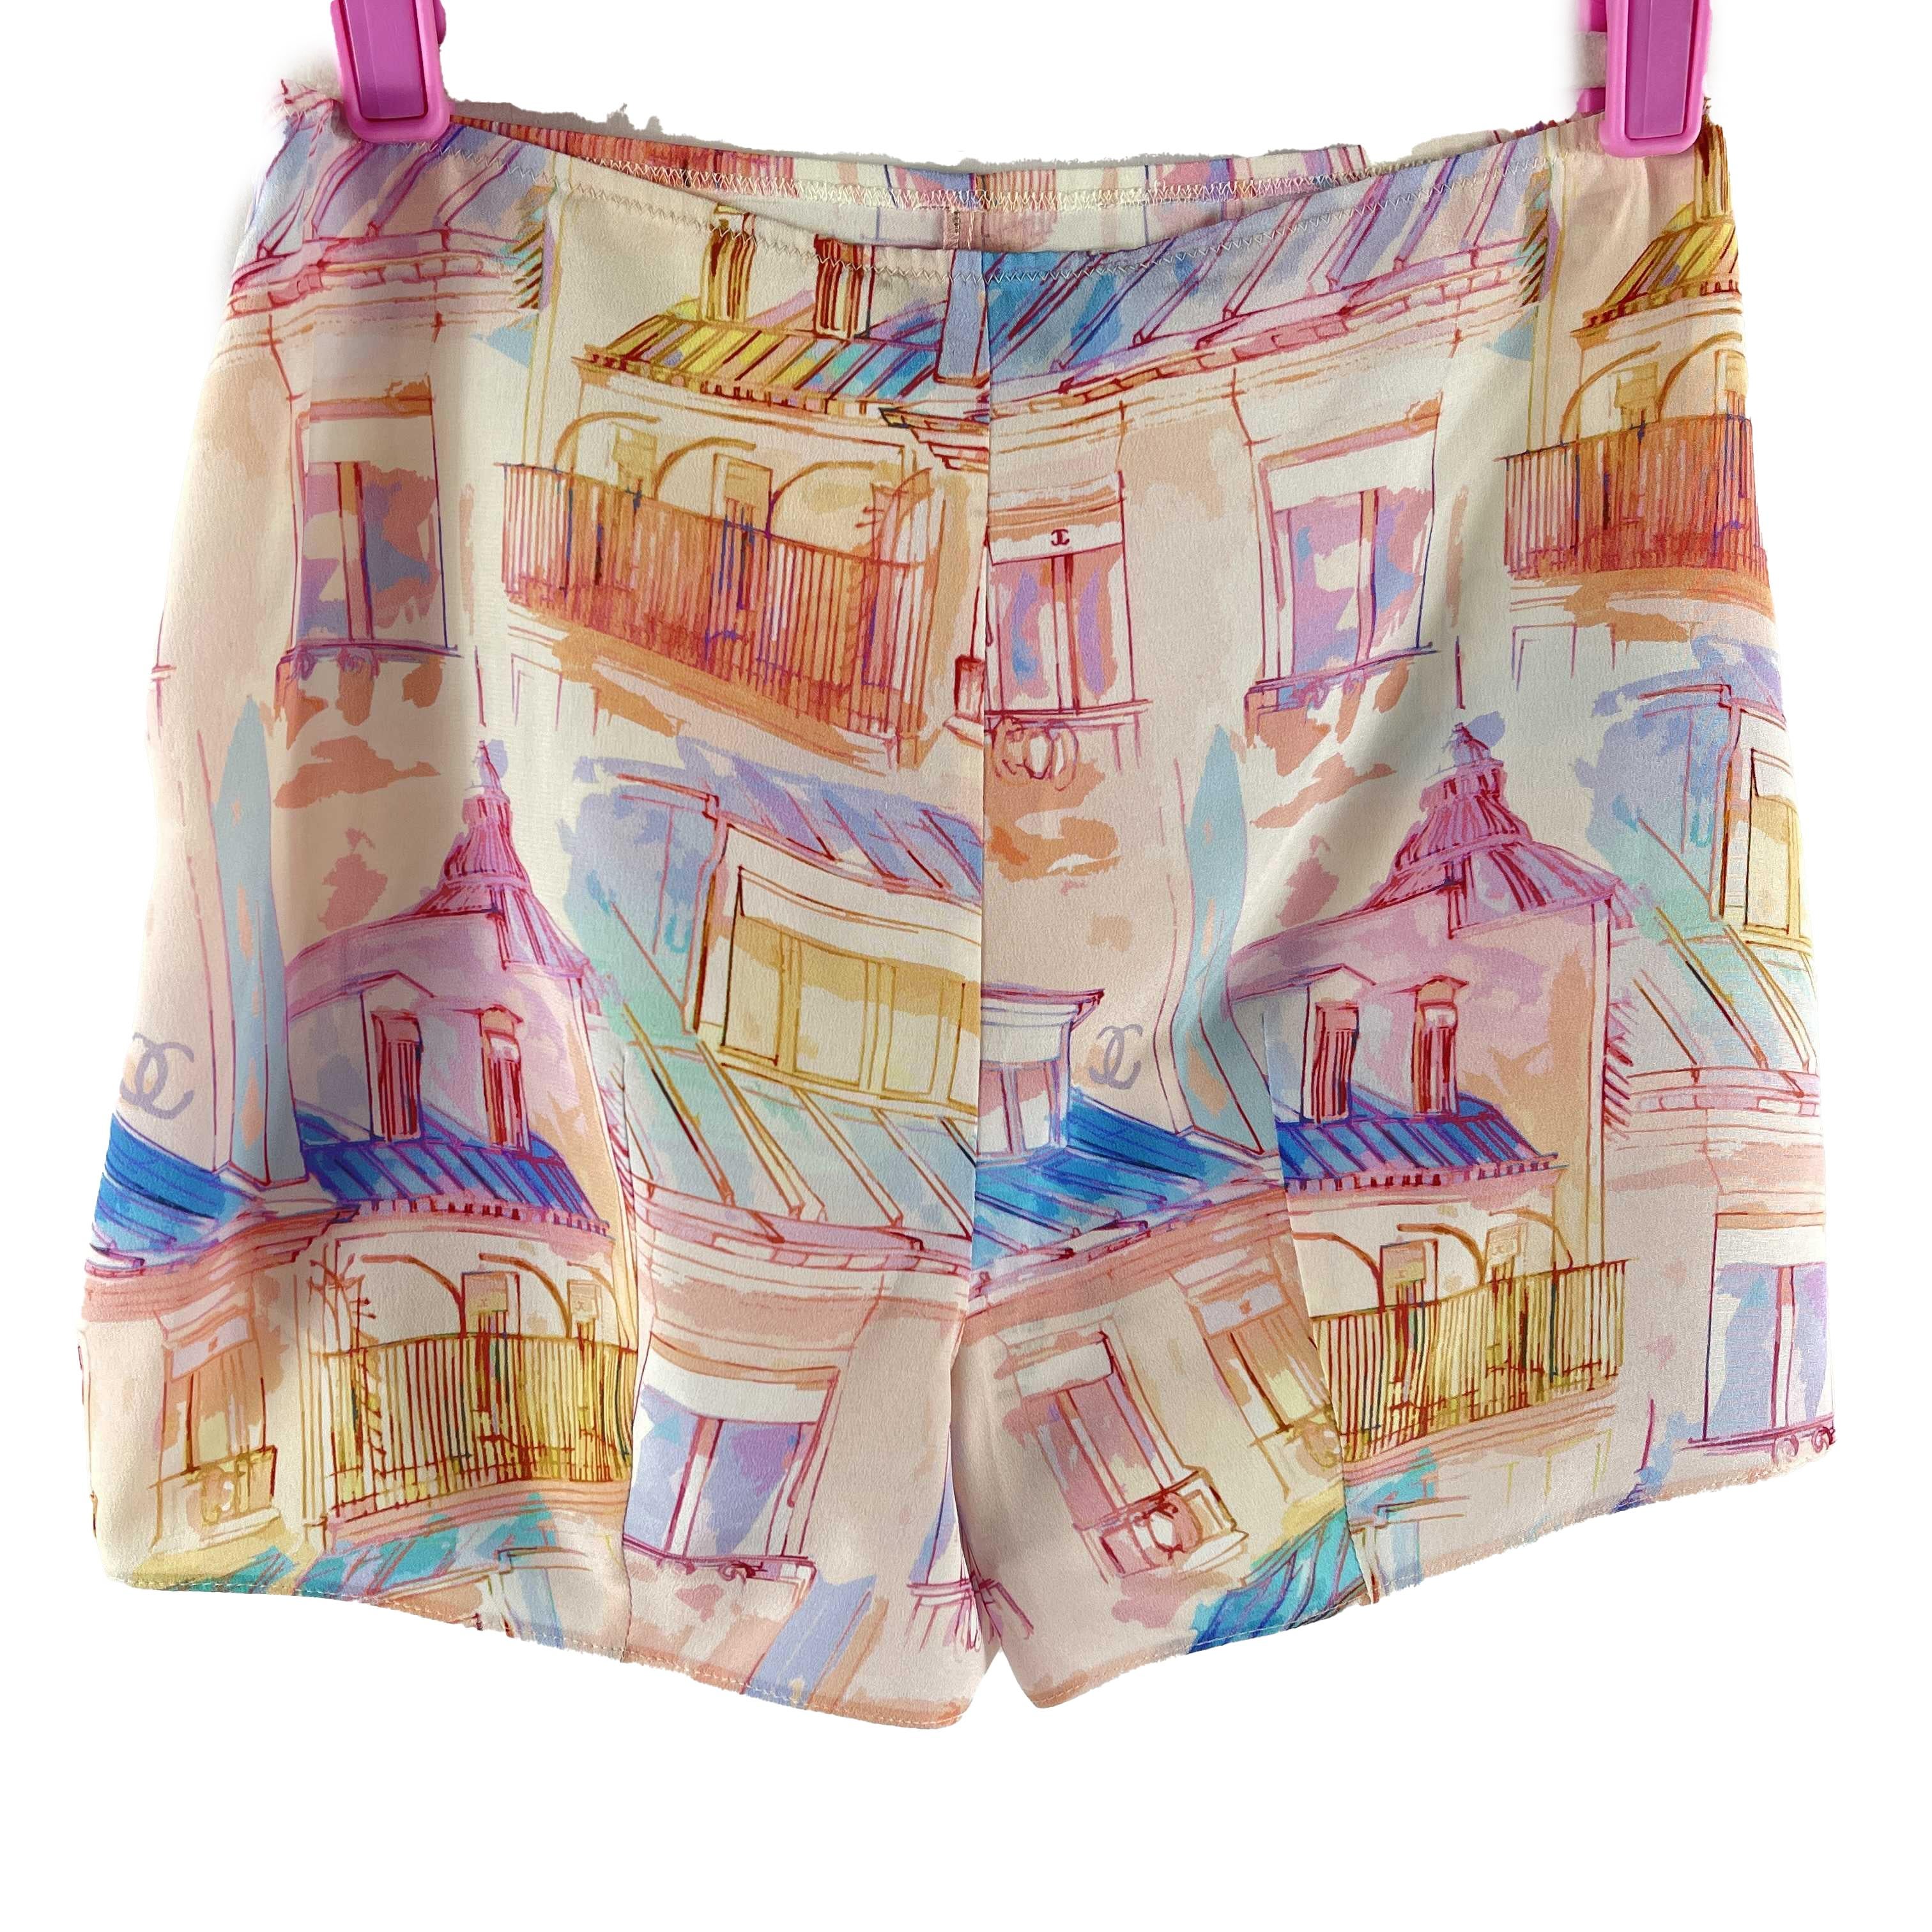 CHANEL - New w/ Tags - 20S Paris Print Pastel Shorts - Beige, Pink, Blue, Yellow, Purple, Orange - 34 - XS - Bottoms

Description

These Chanel shorts are from the 2020 Summer Spring Act 2 Collection.
They are crafted with silk and are designed with